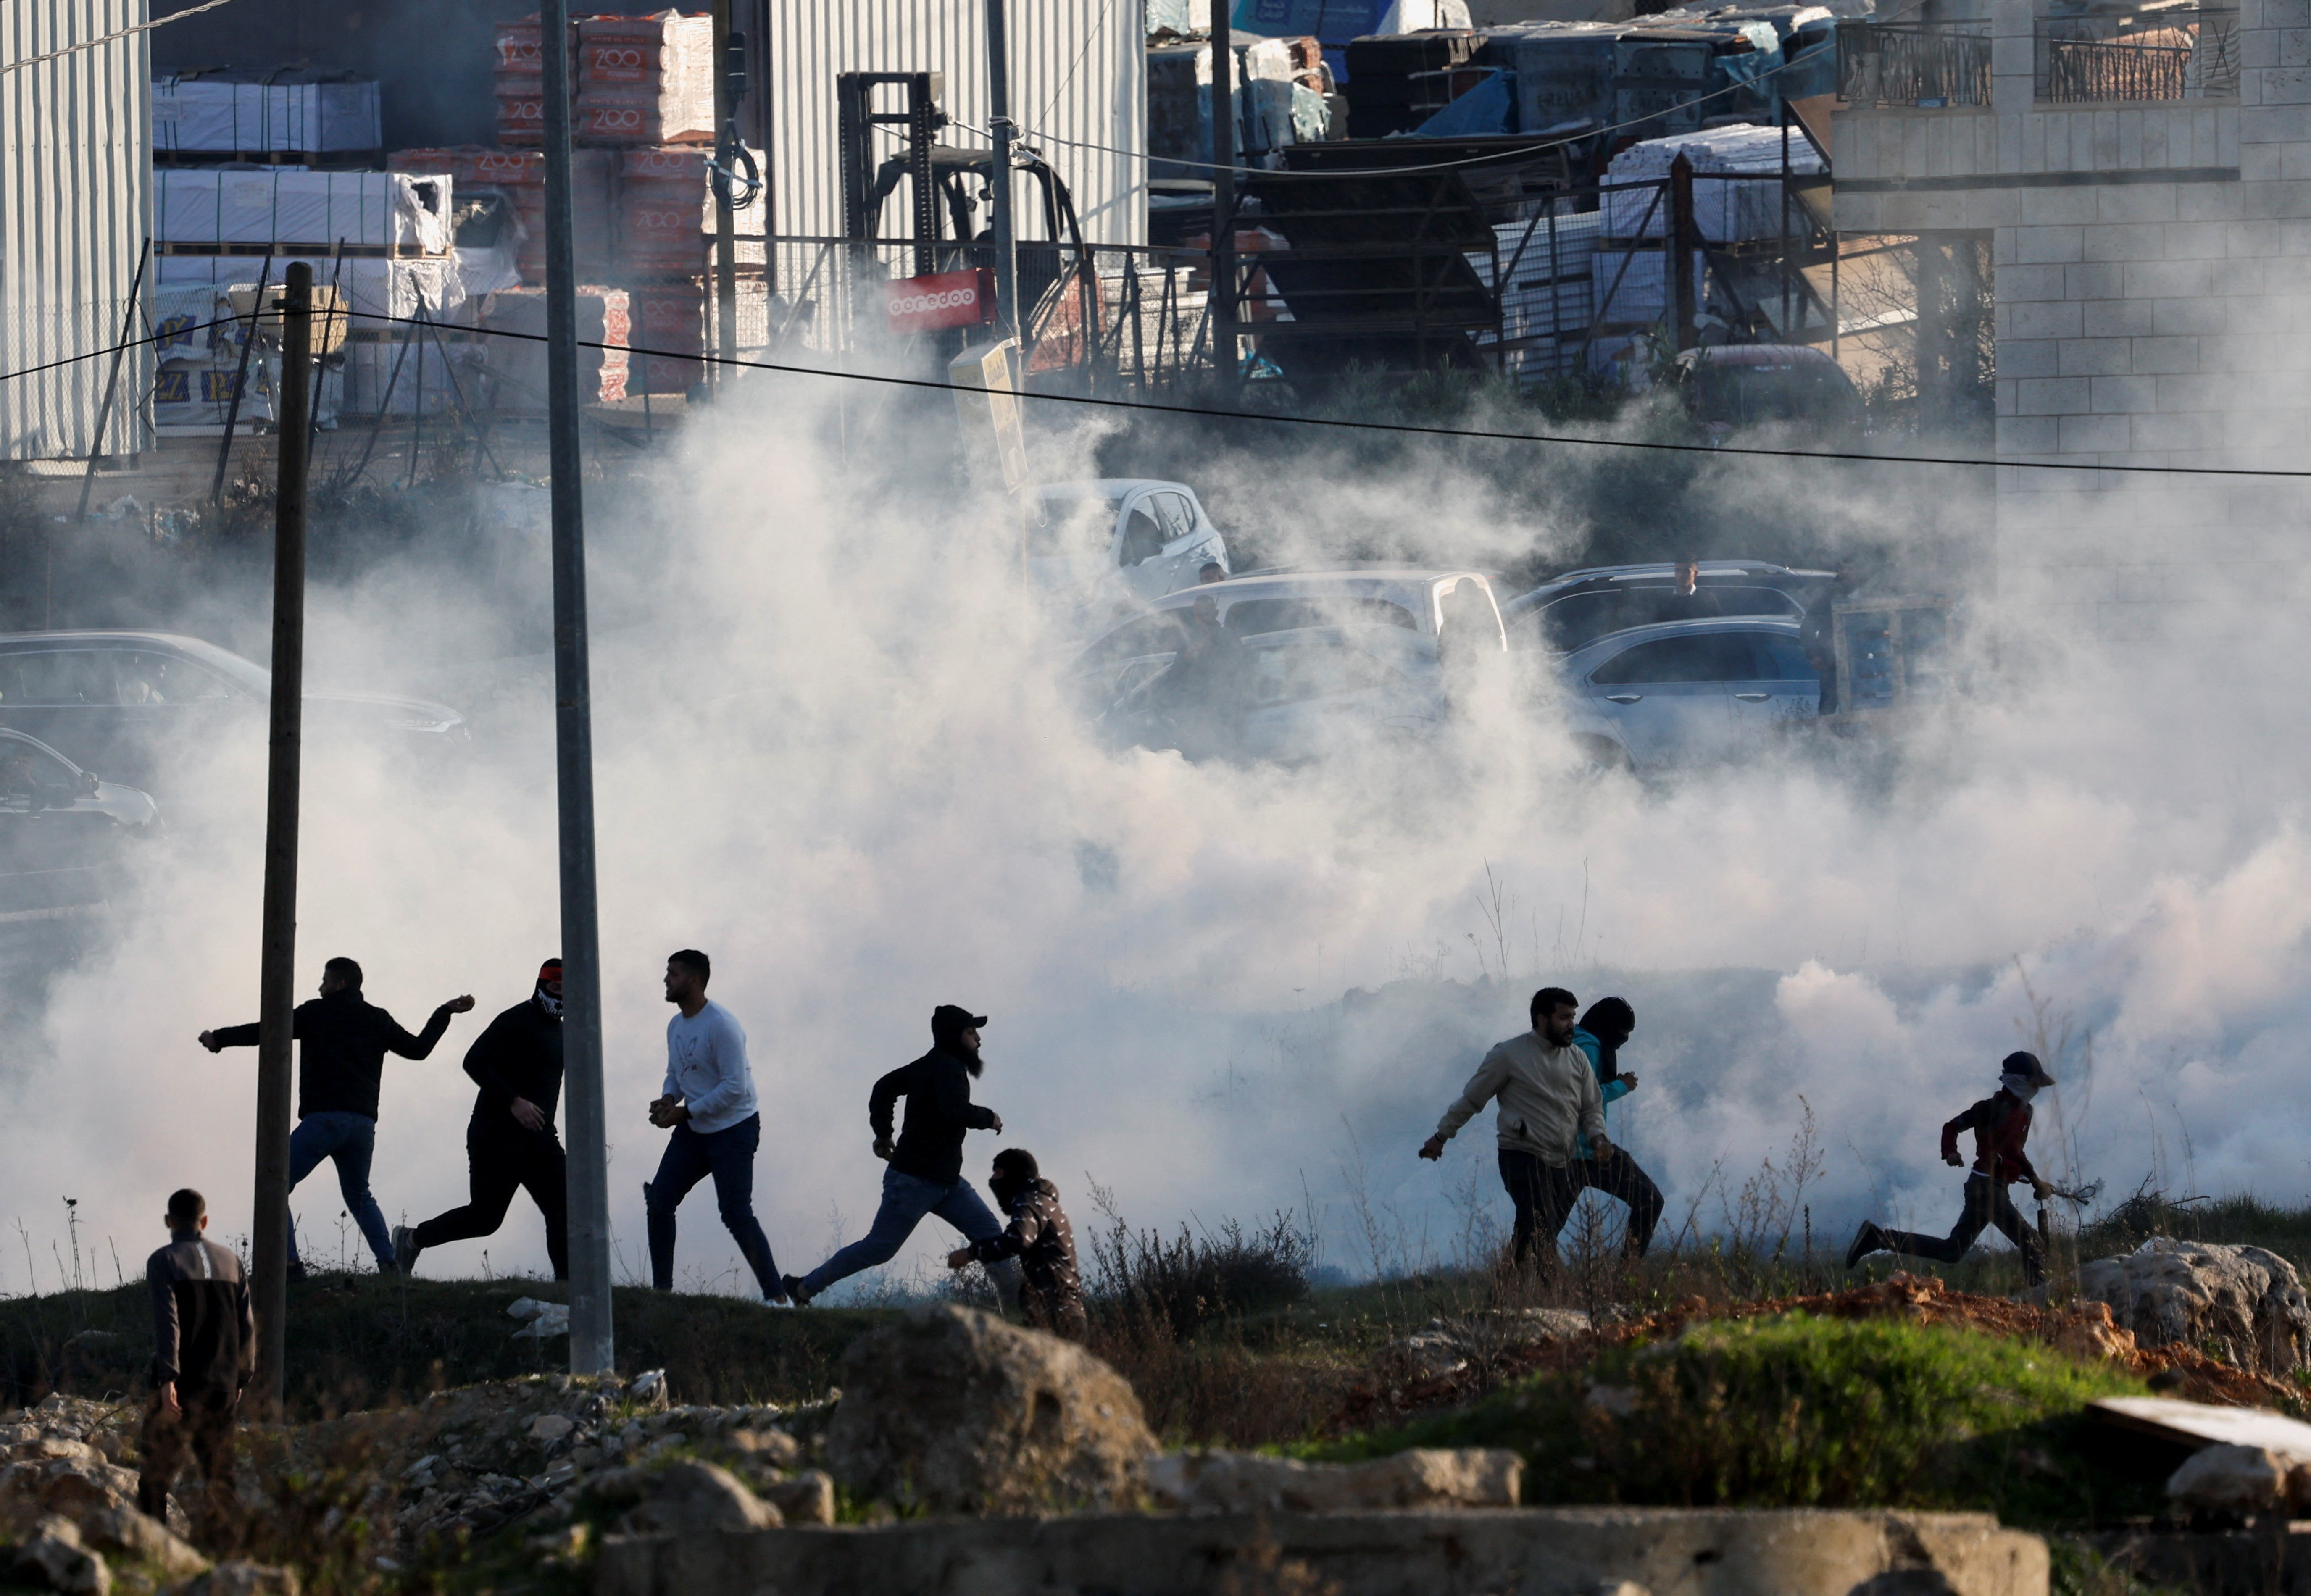 Palestinians clash with Israeli troops near Ramallah in the Israeli-occupied West Bank